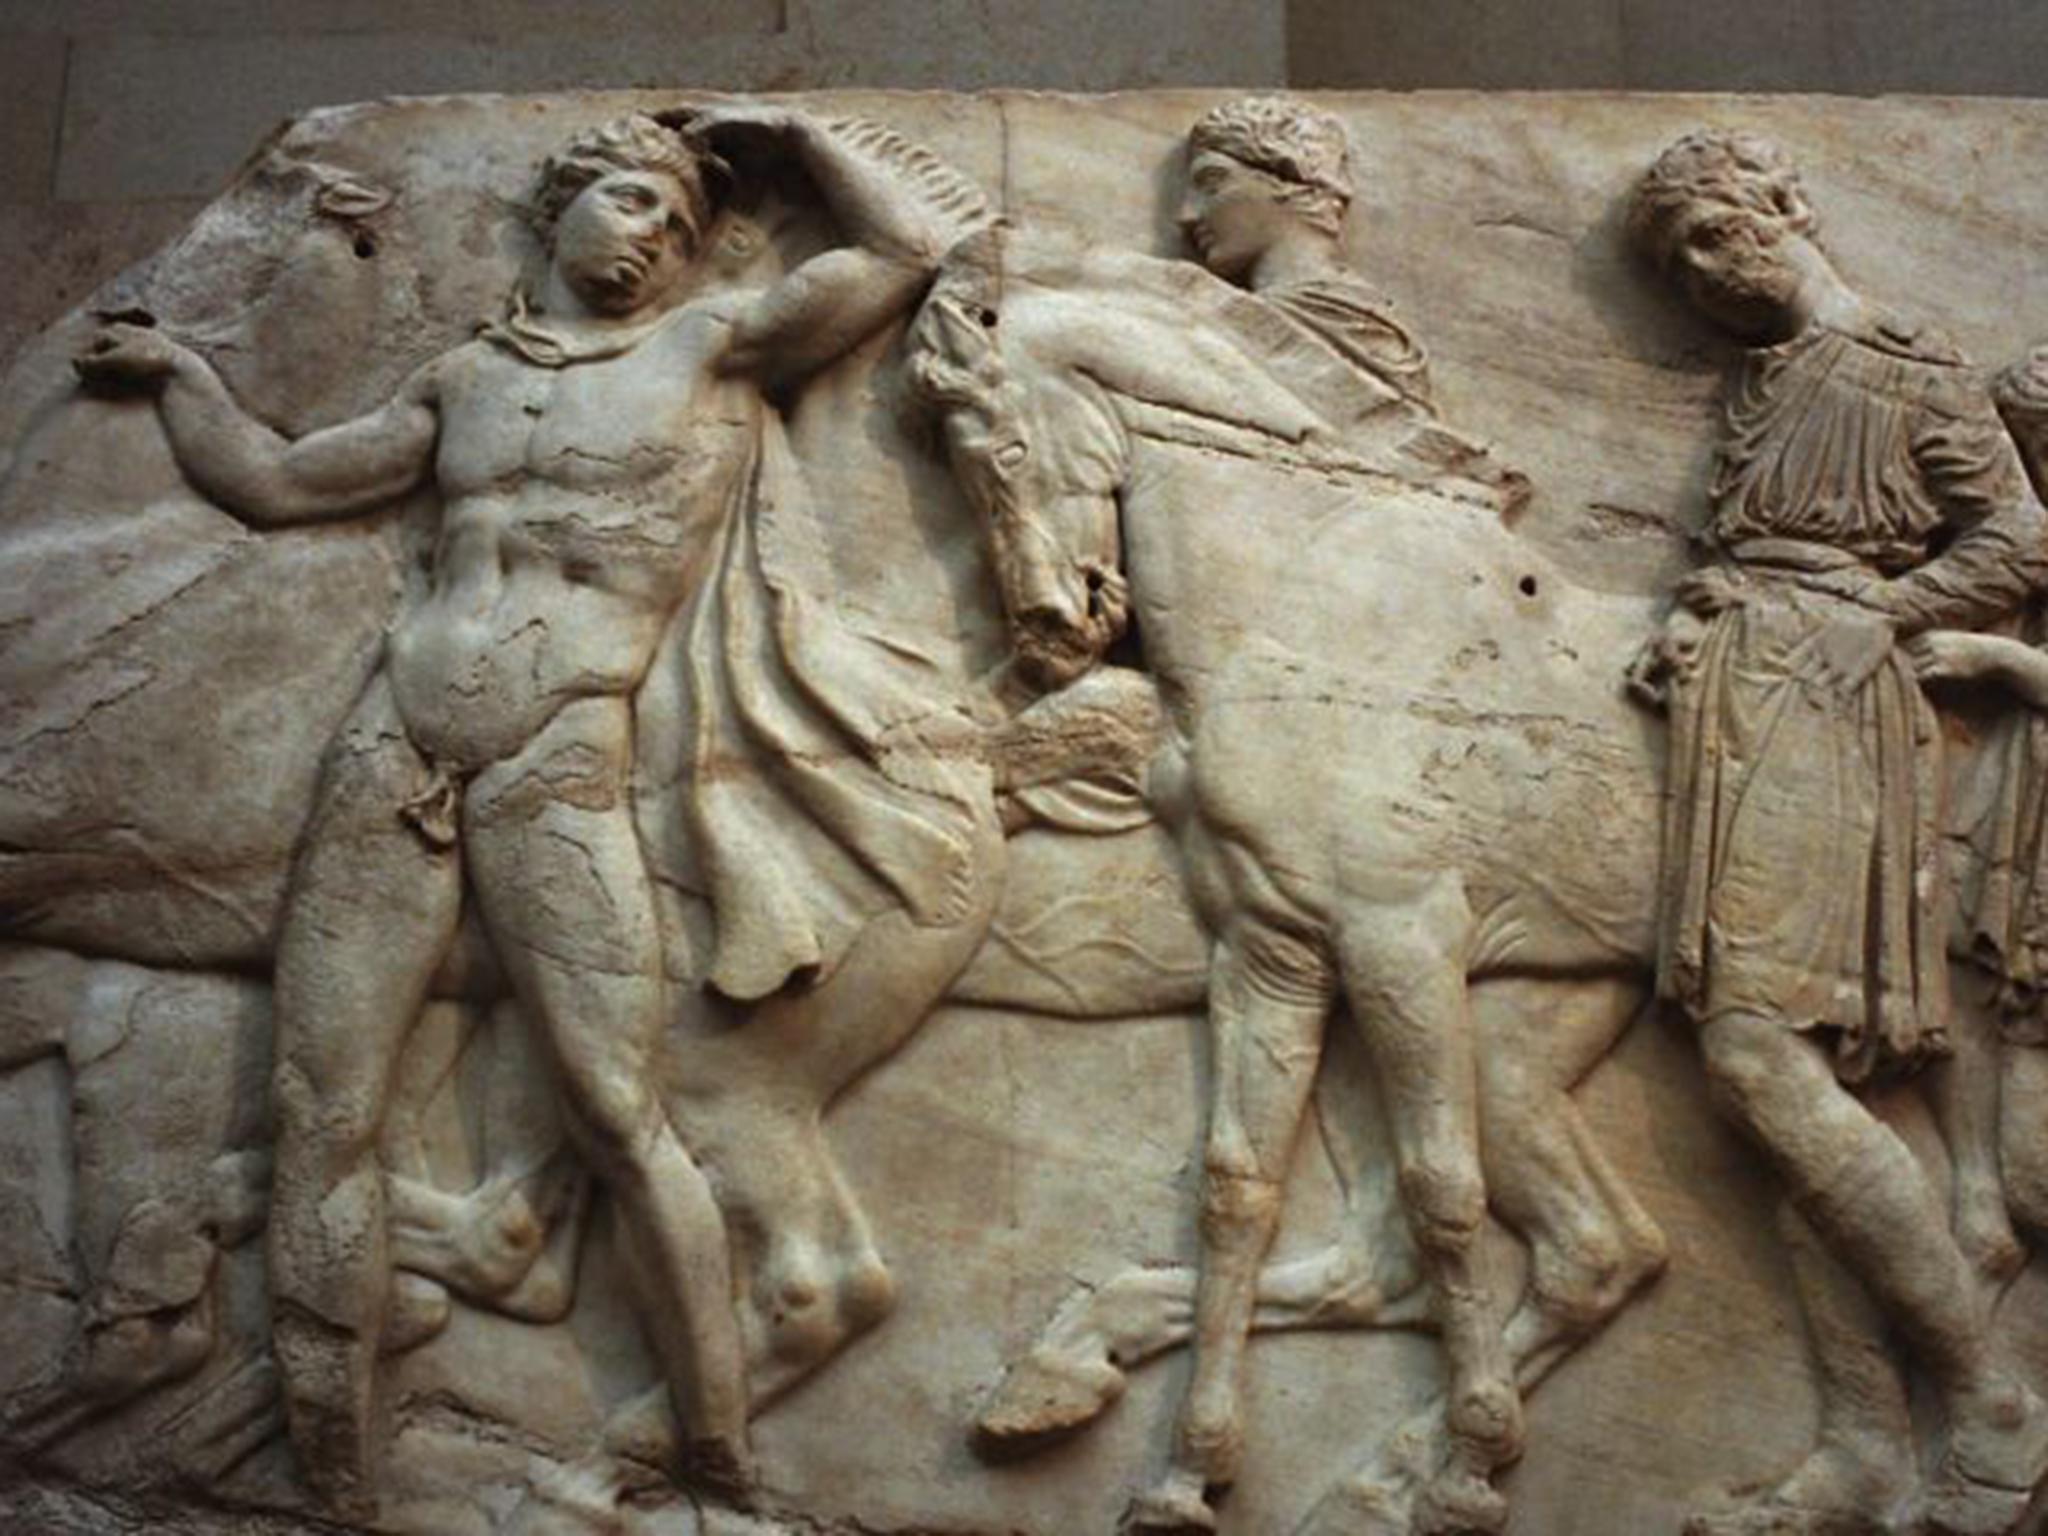 One of the Elgin Marbles at the British Museum, which has faced requests from Greece for their return